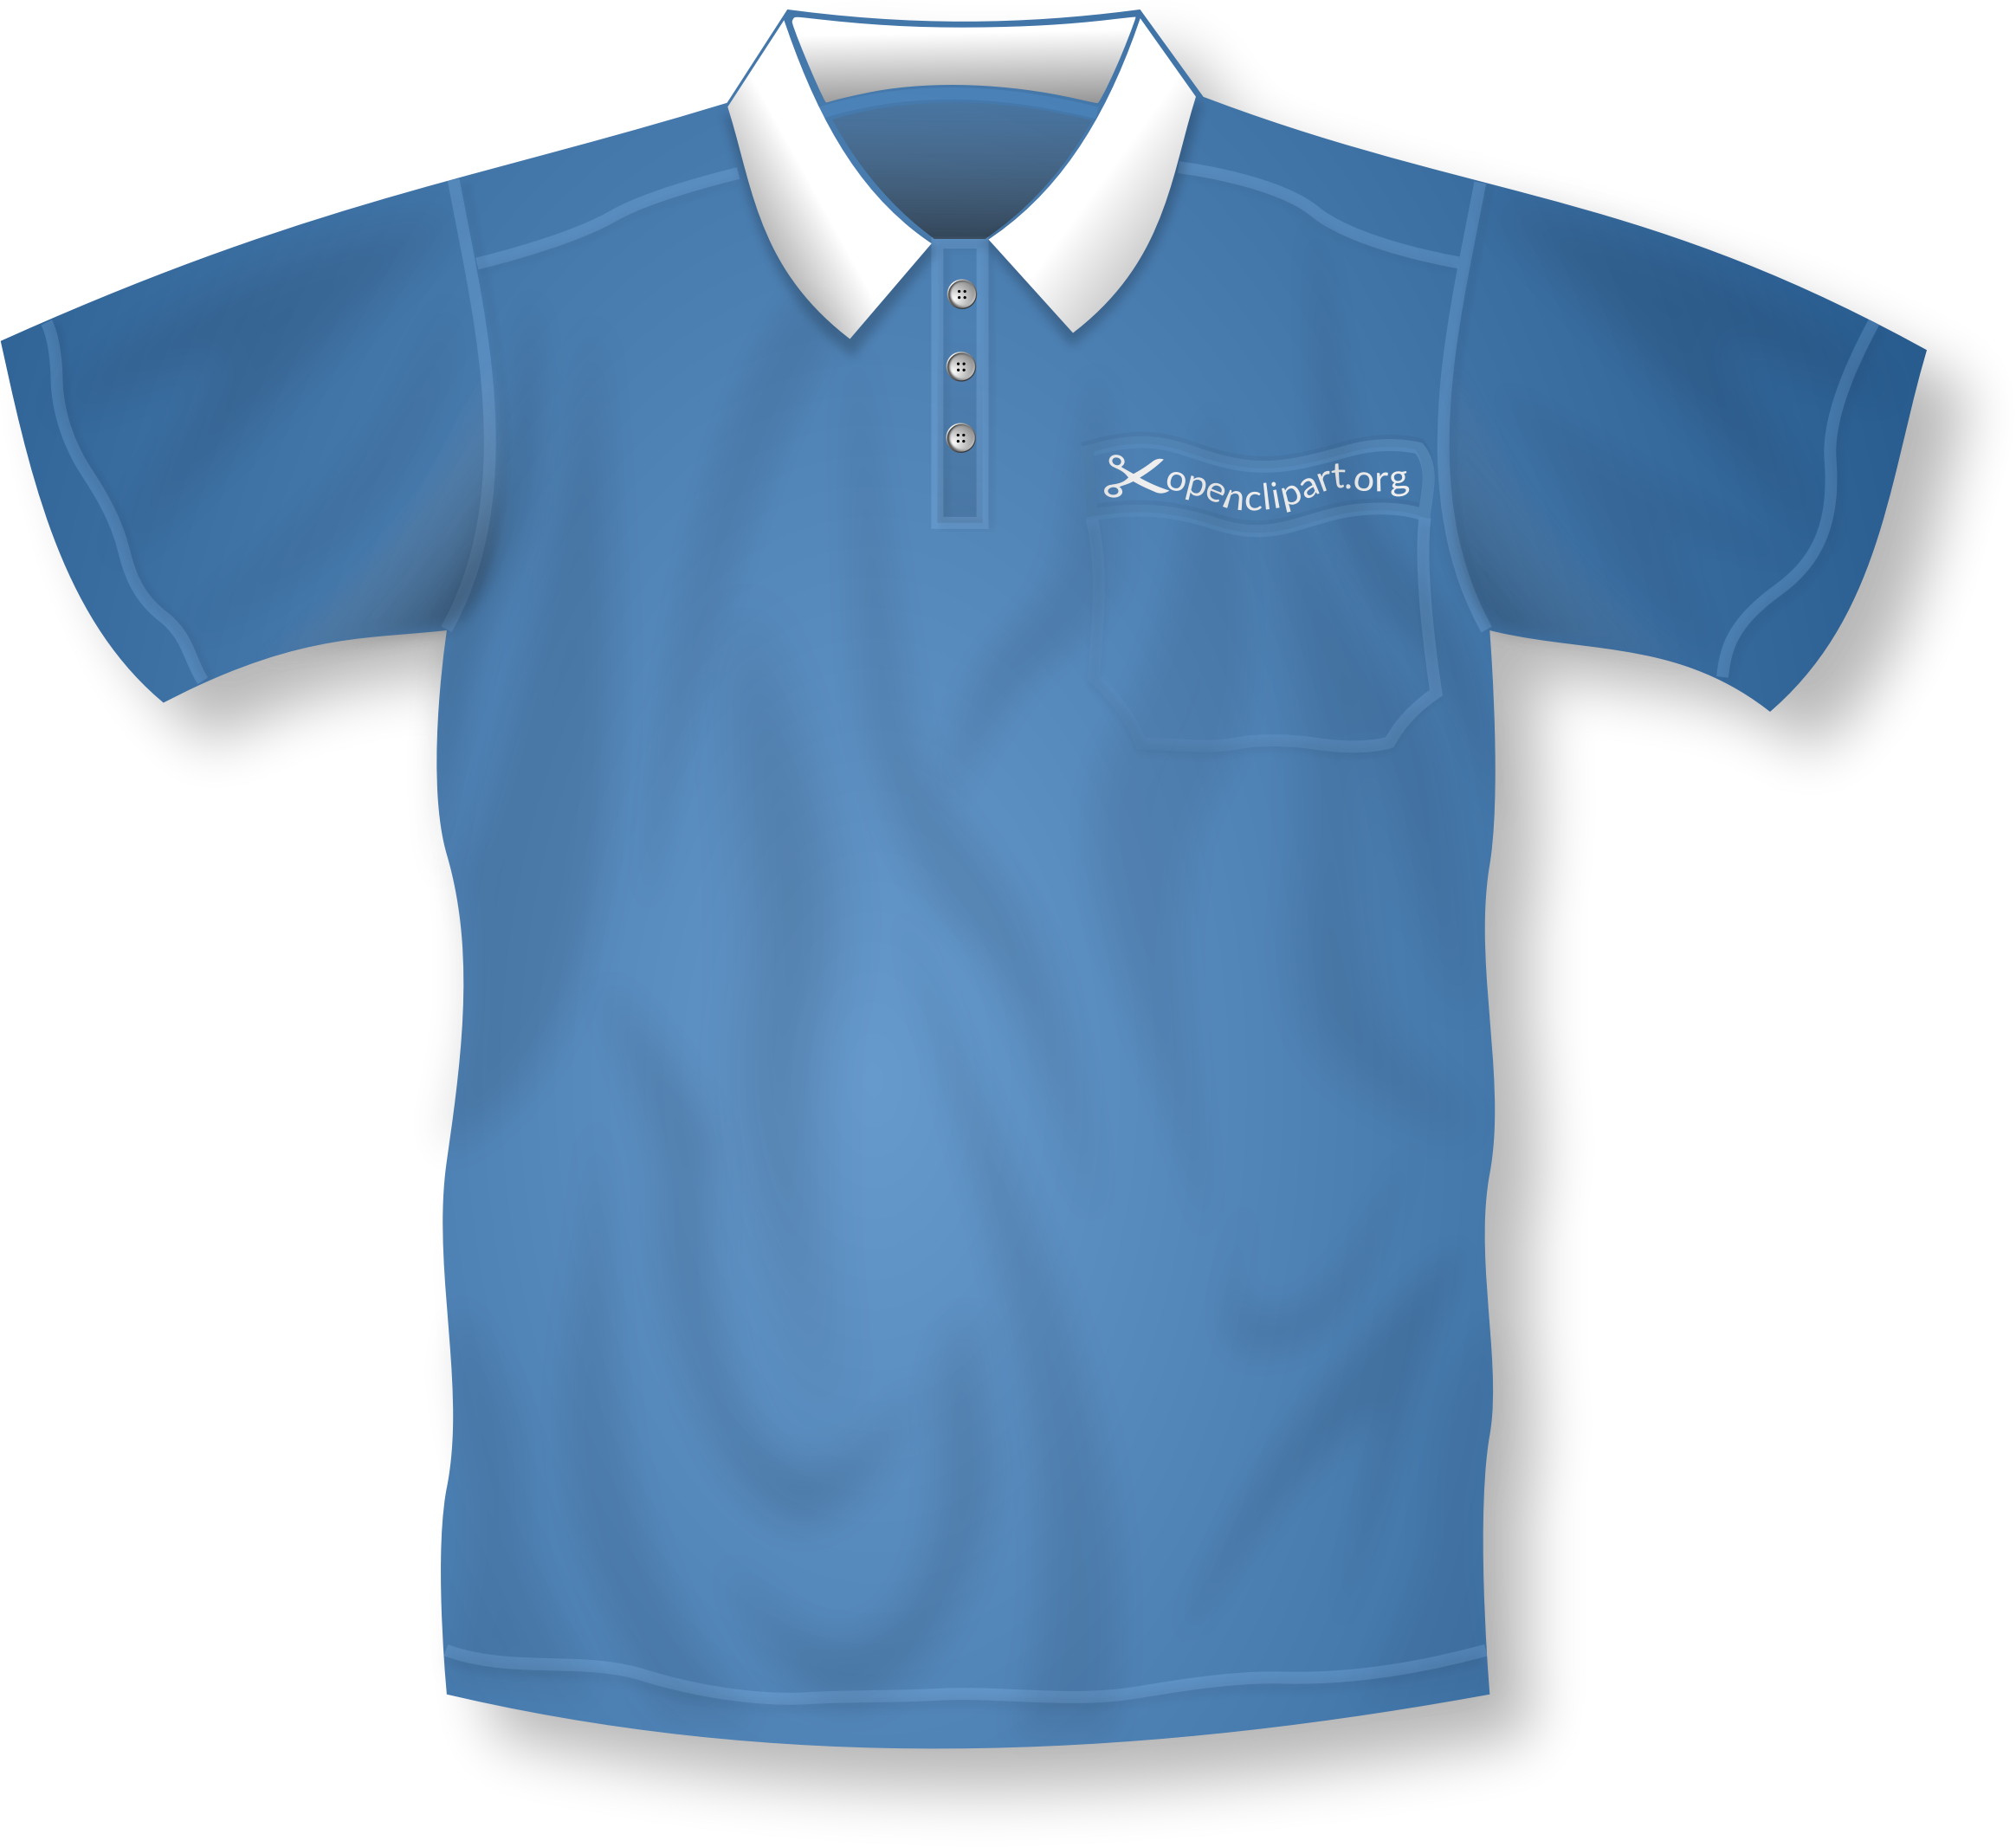  collection of high. Shirt clipart polo